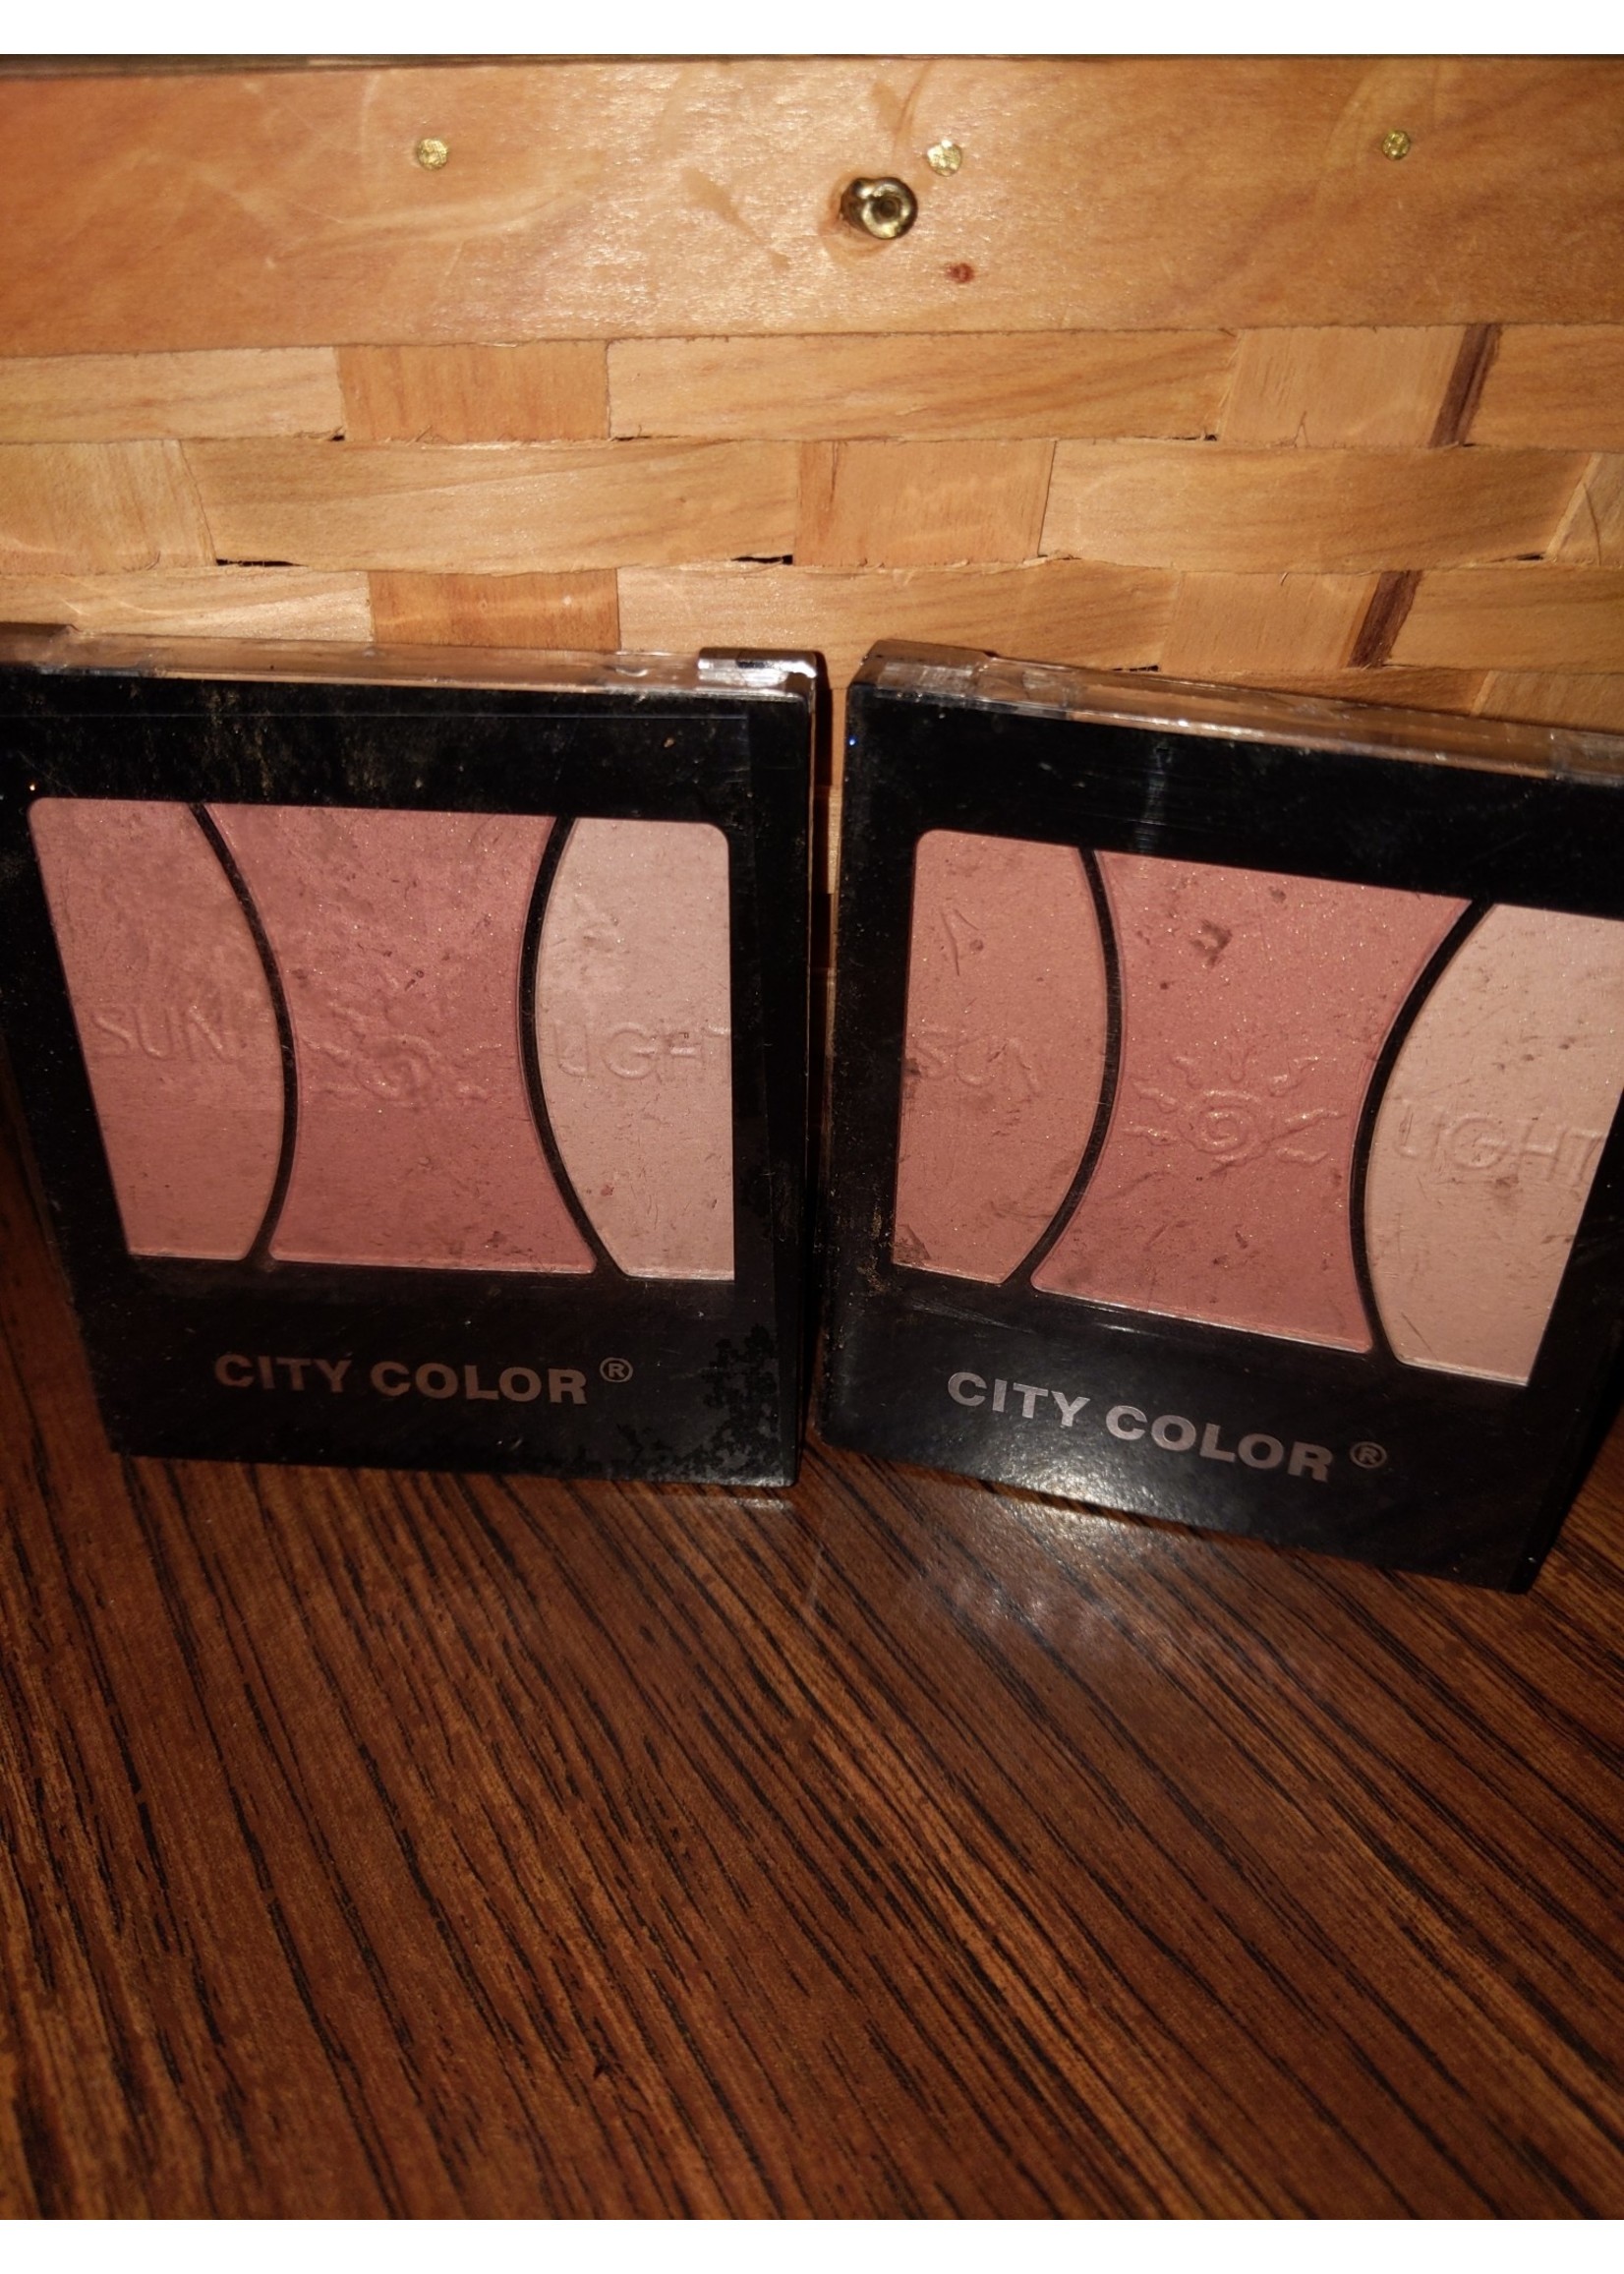 City Color City Color Sunlight Trio All In One Palette Blush and Bronzer #1